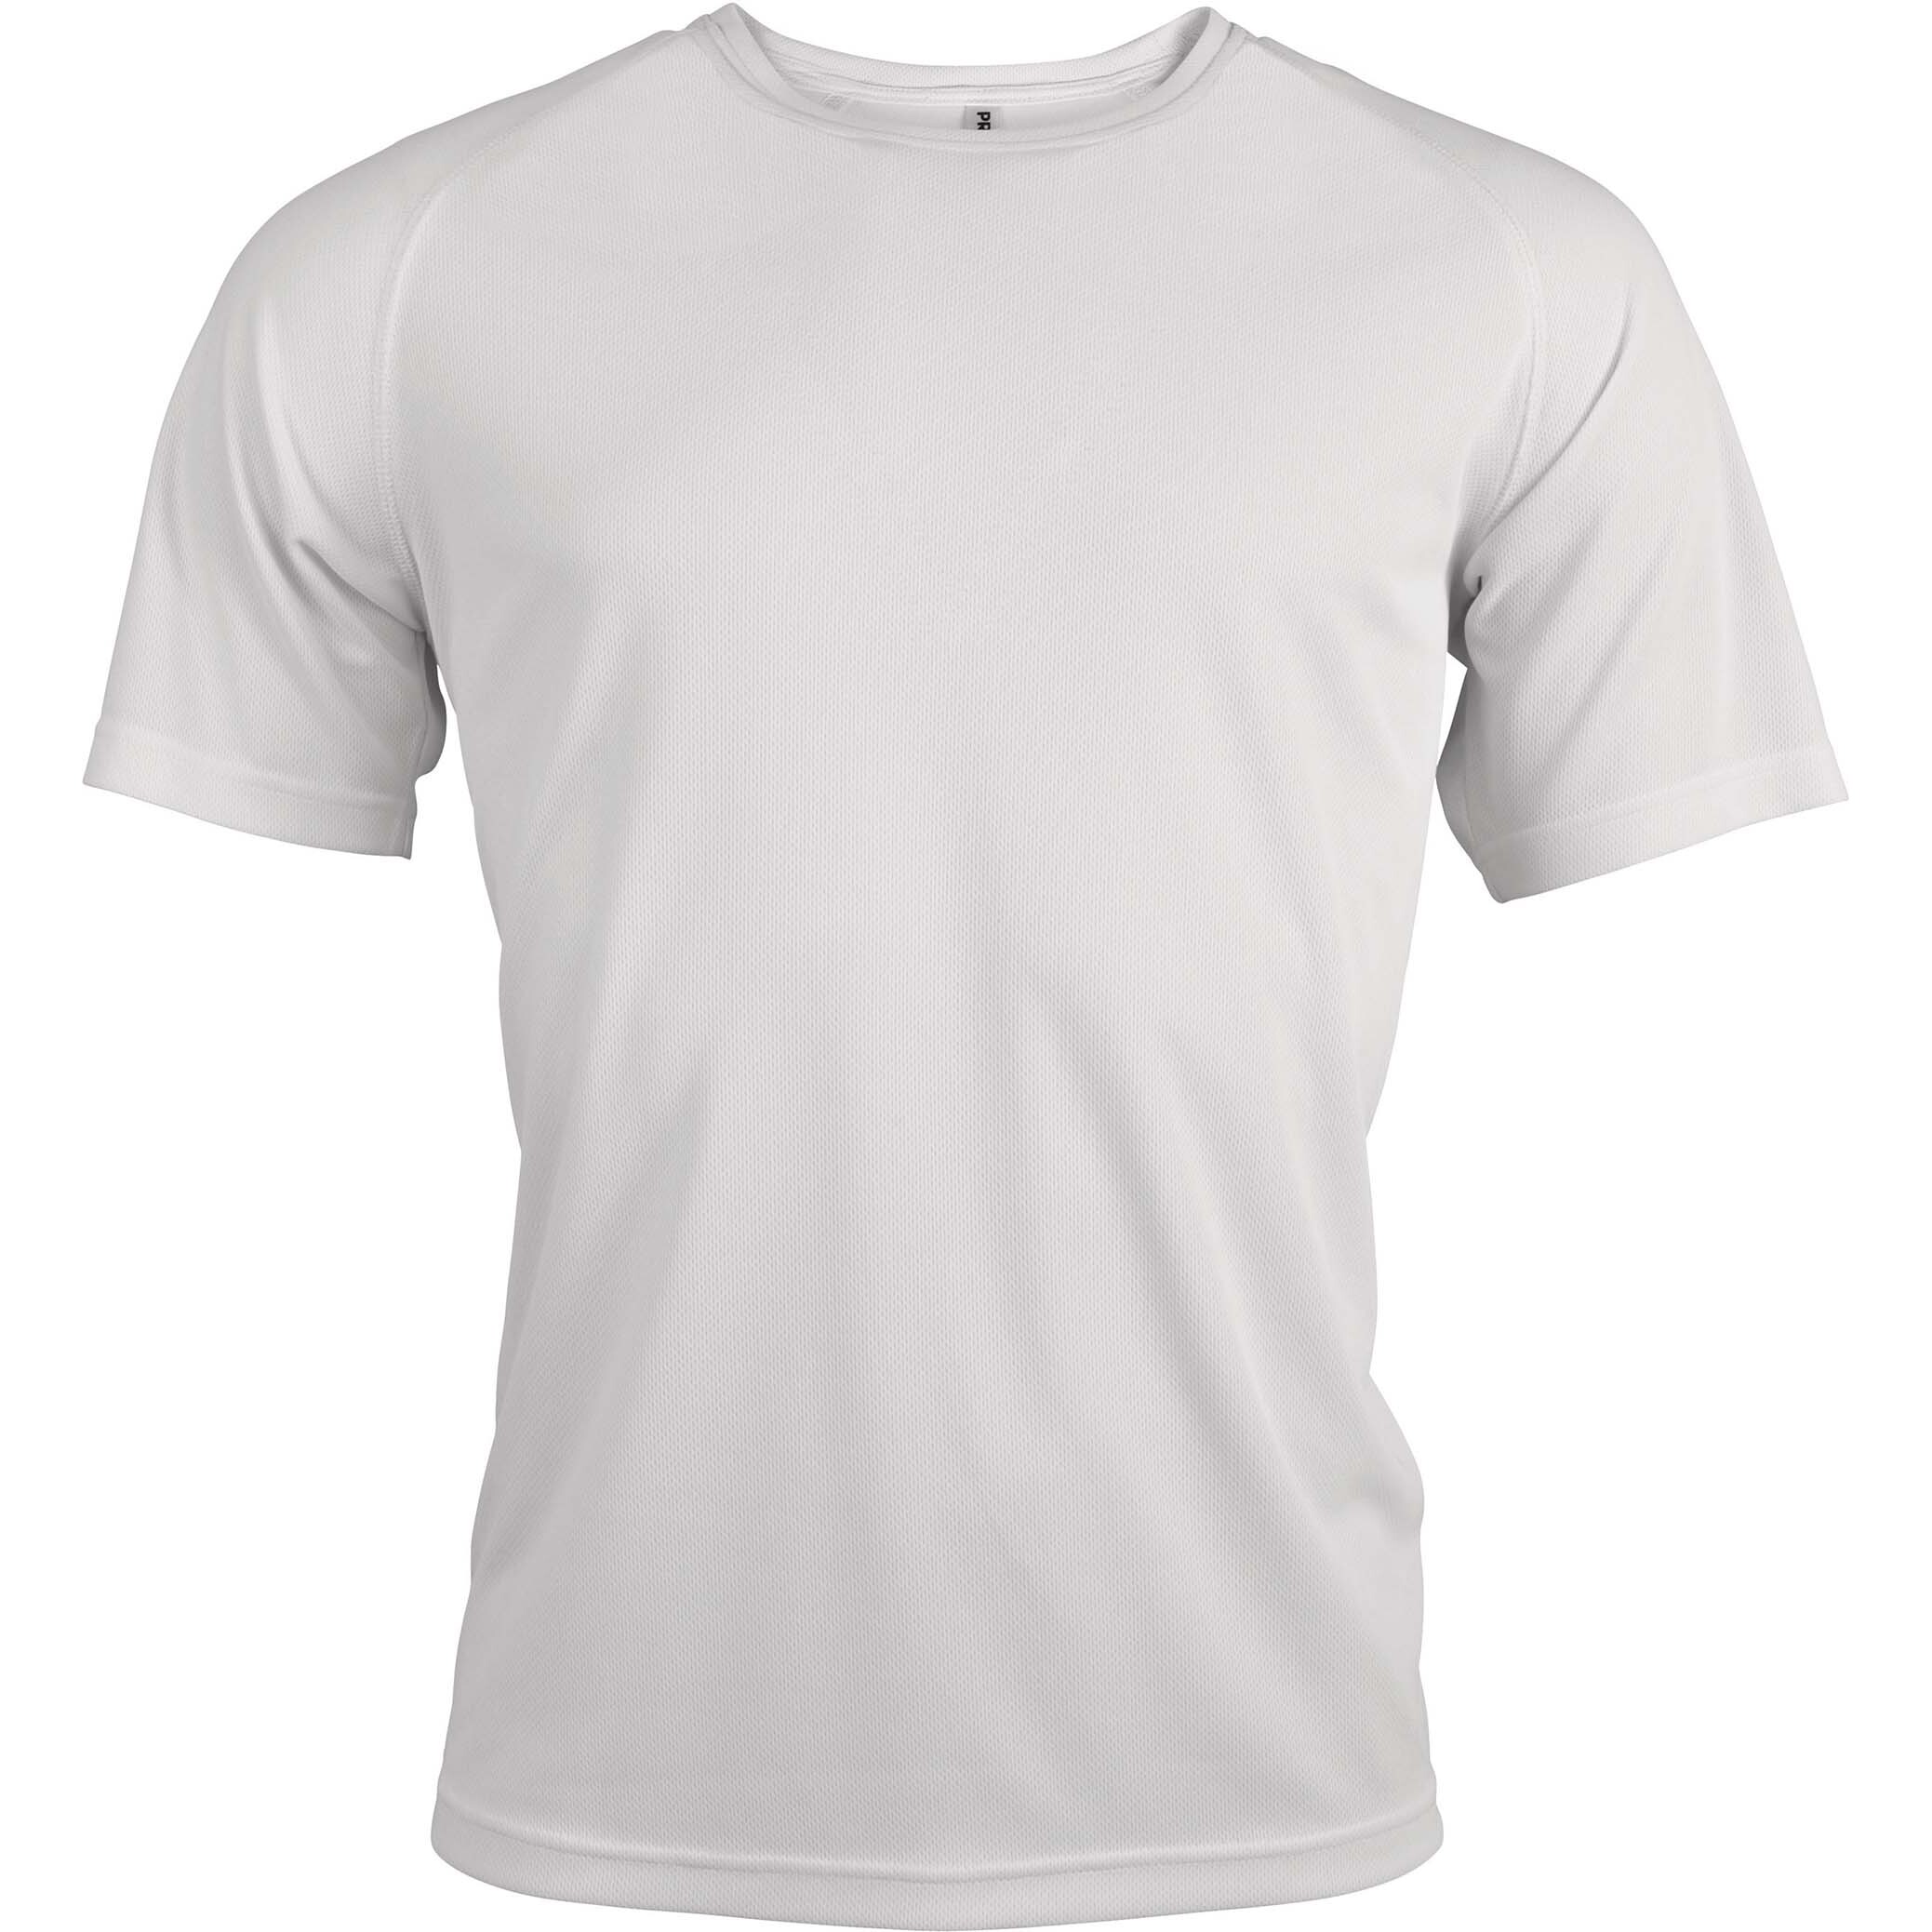 T-Shirt manches courtes Sport Proact blanc